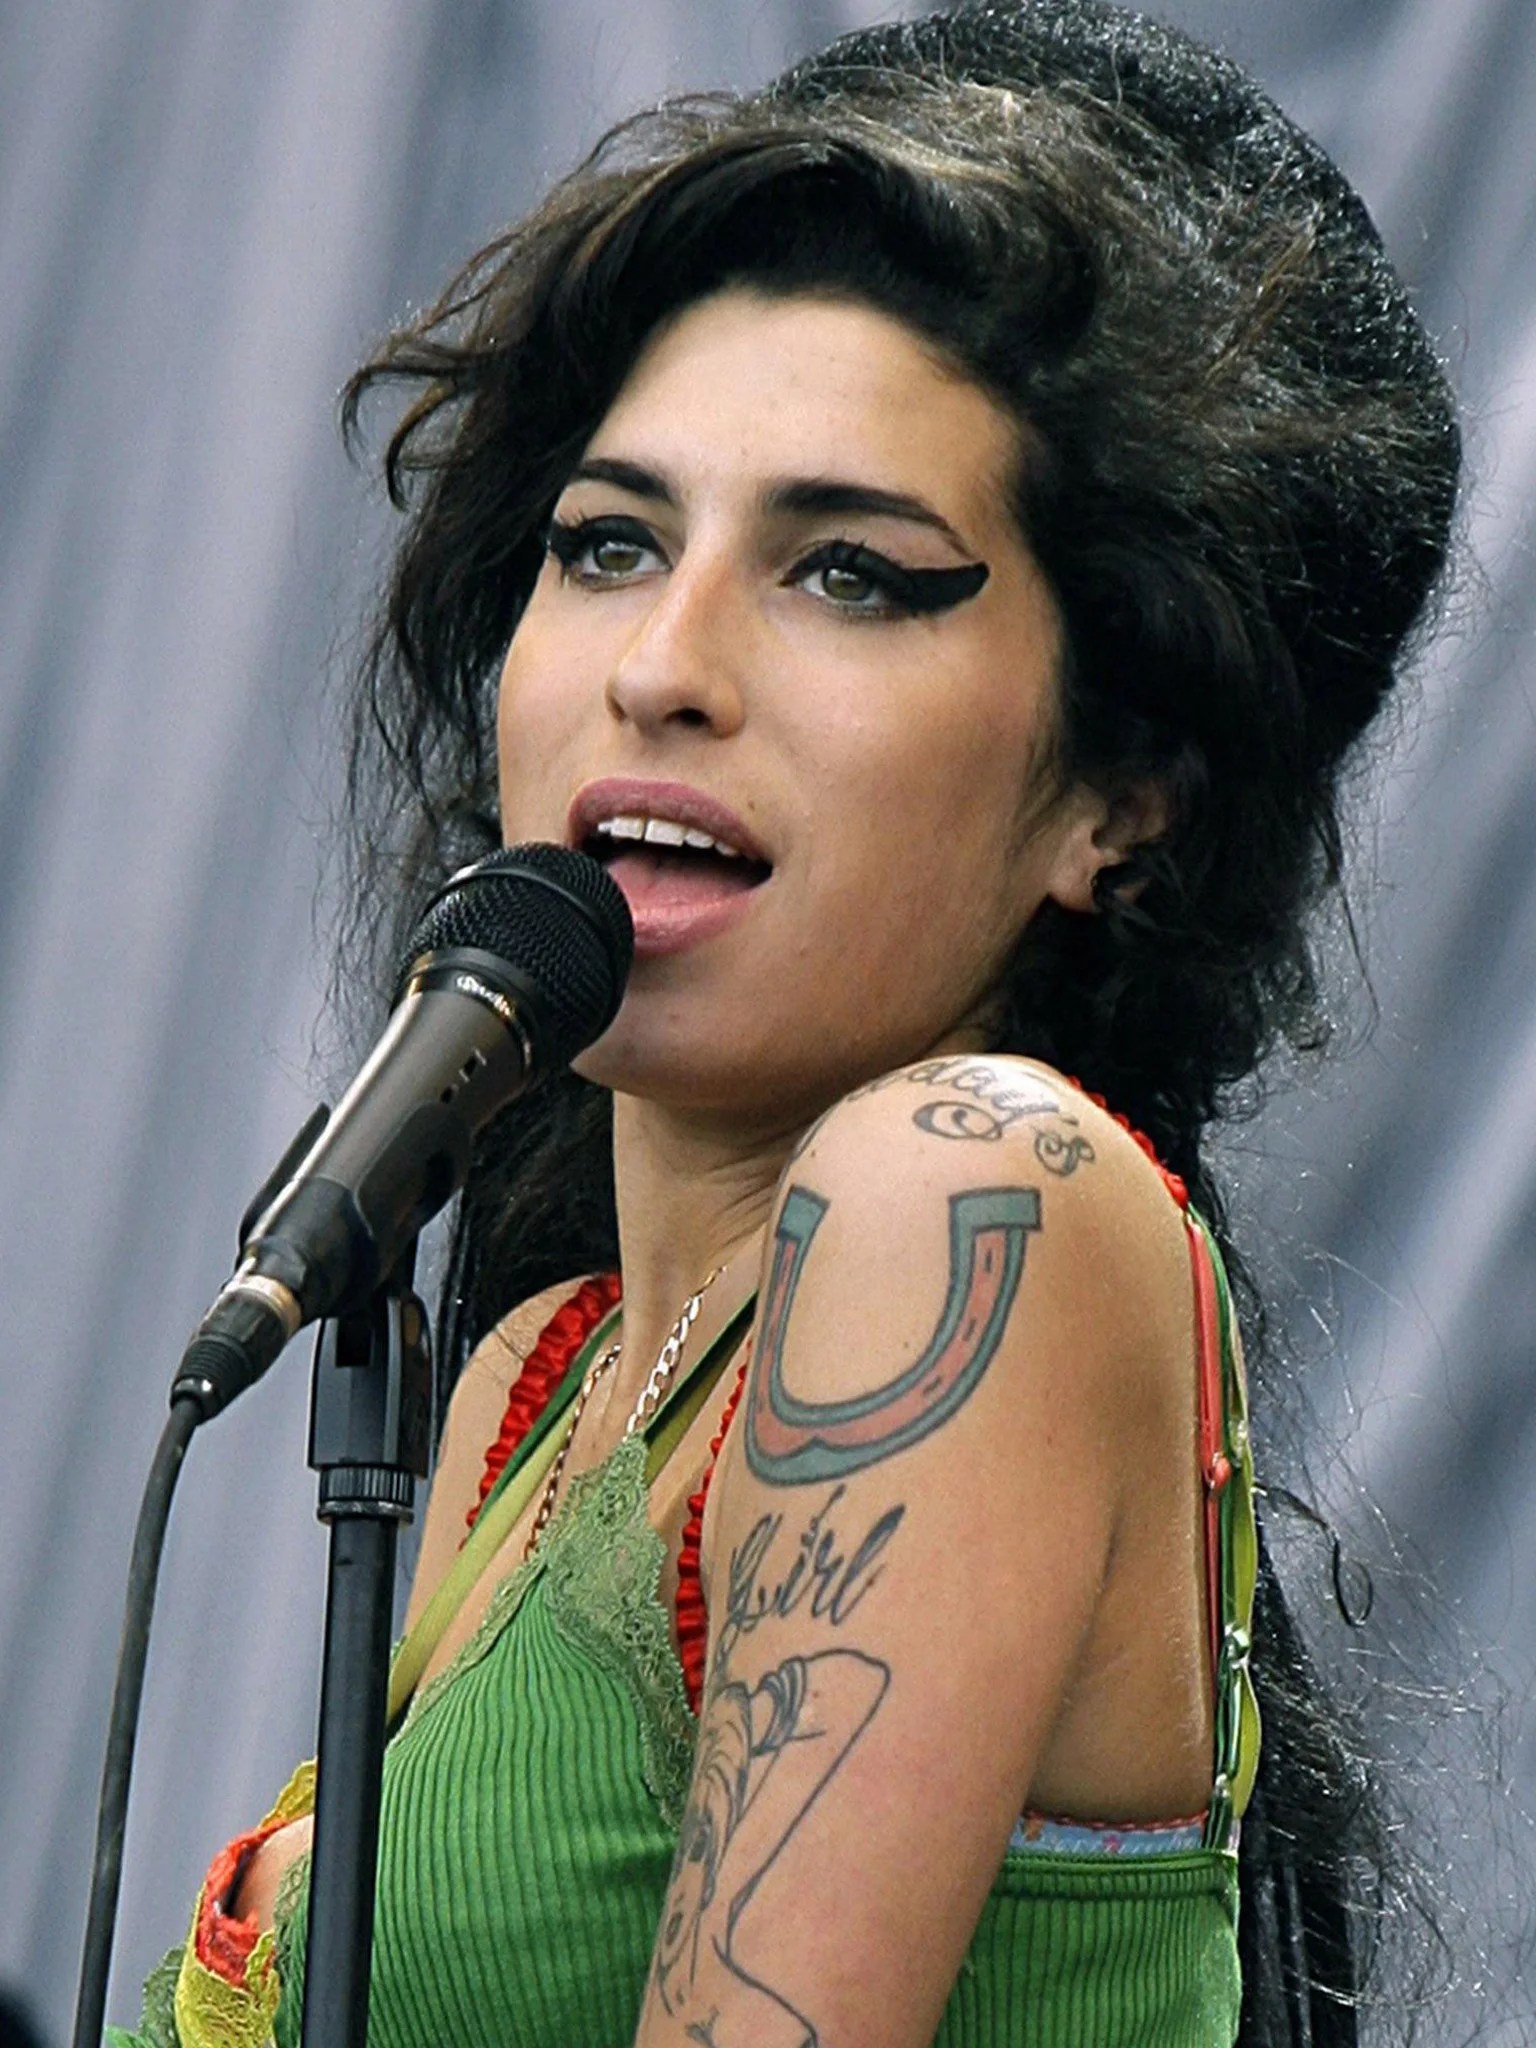 jazzpasob.blogg.se What did amy winehouse die from